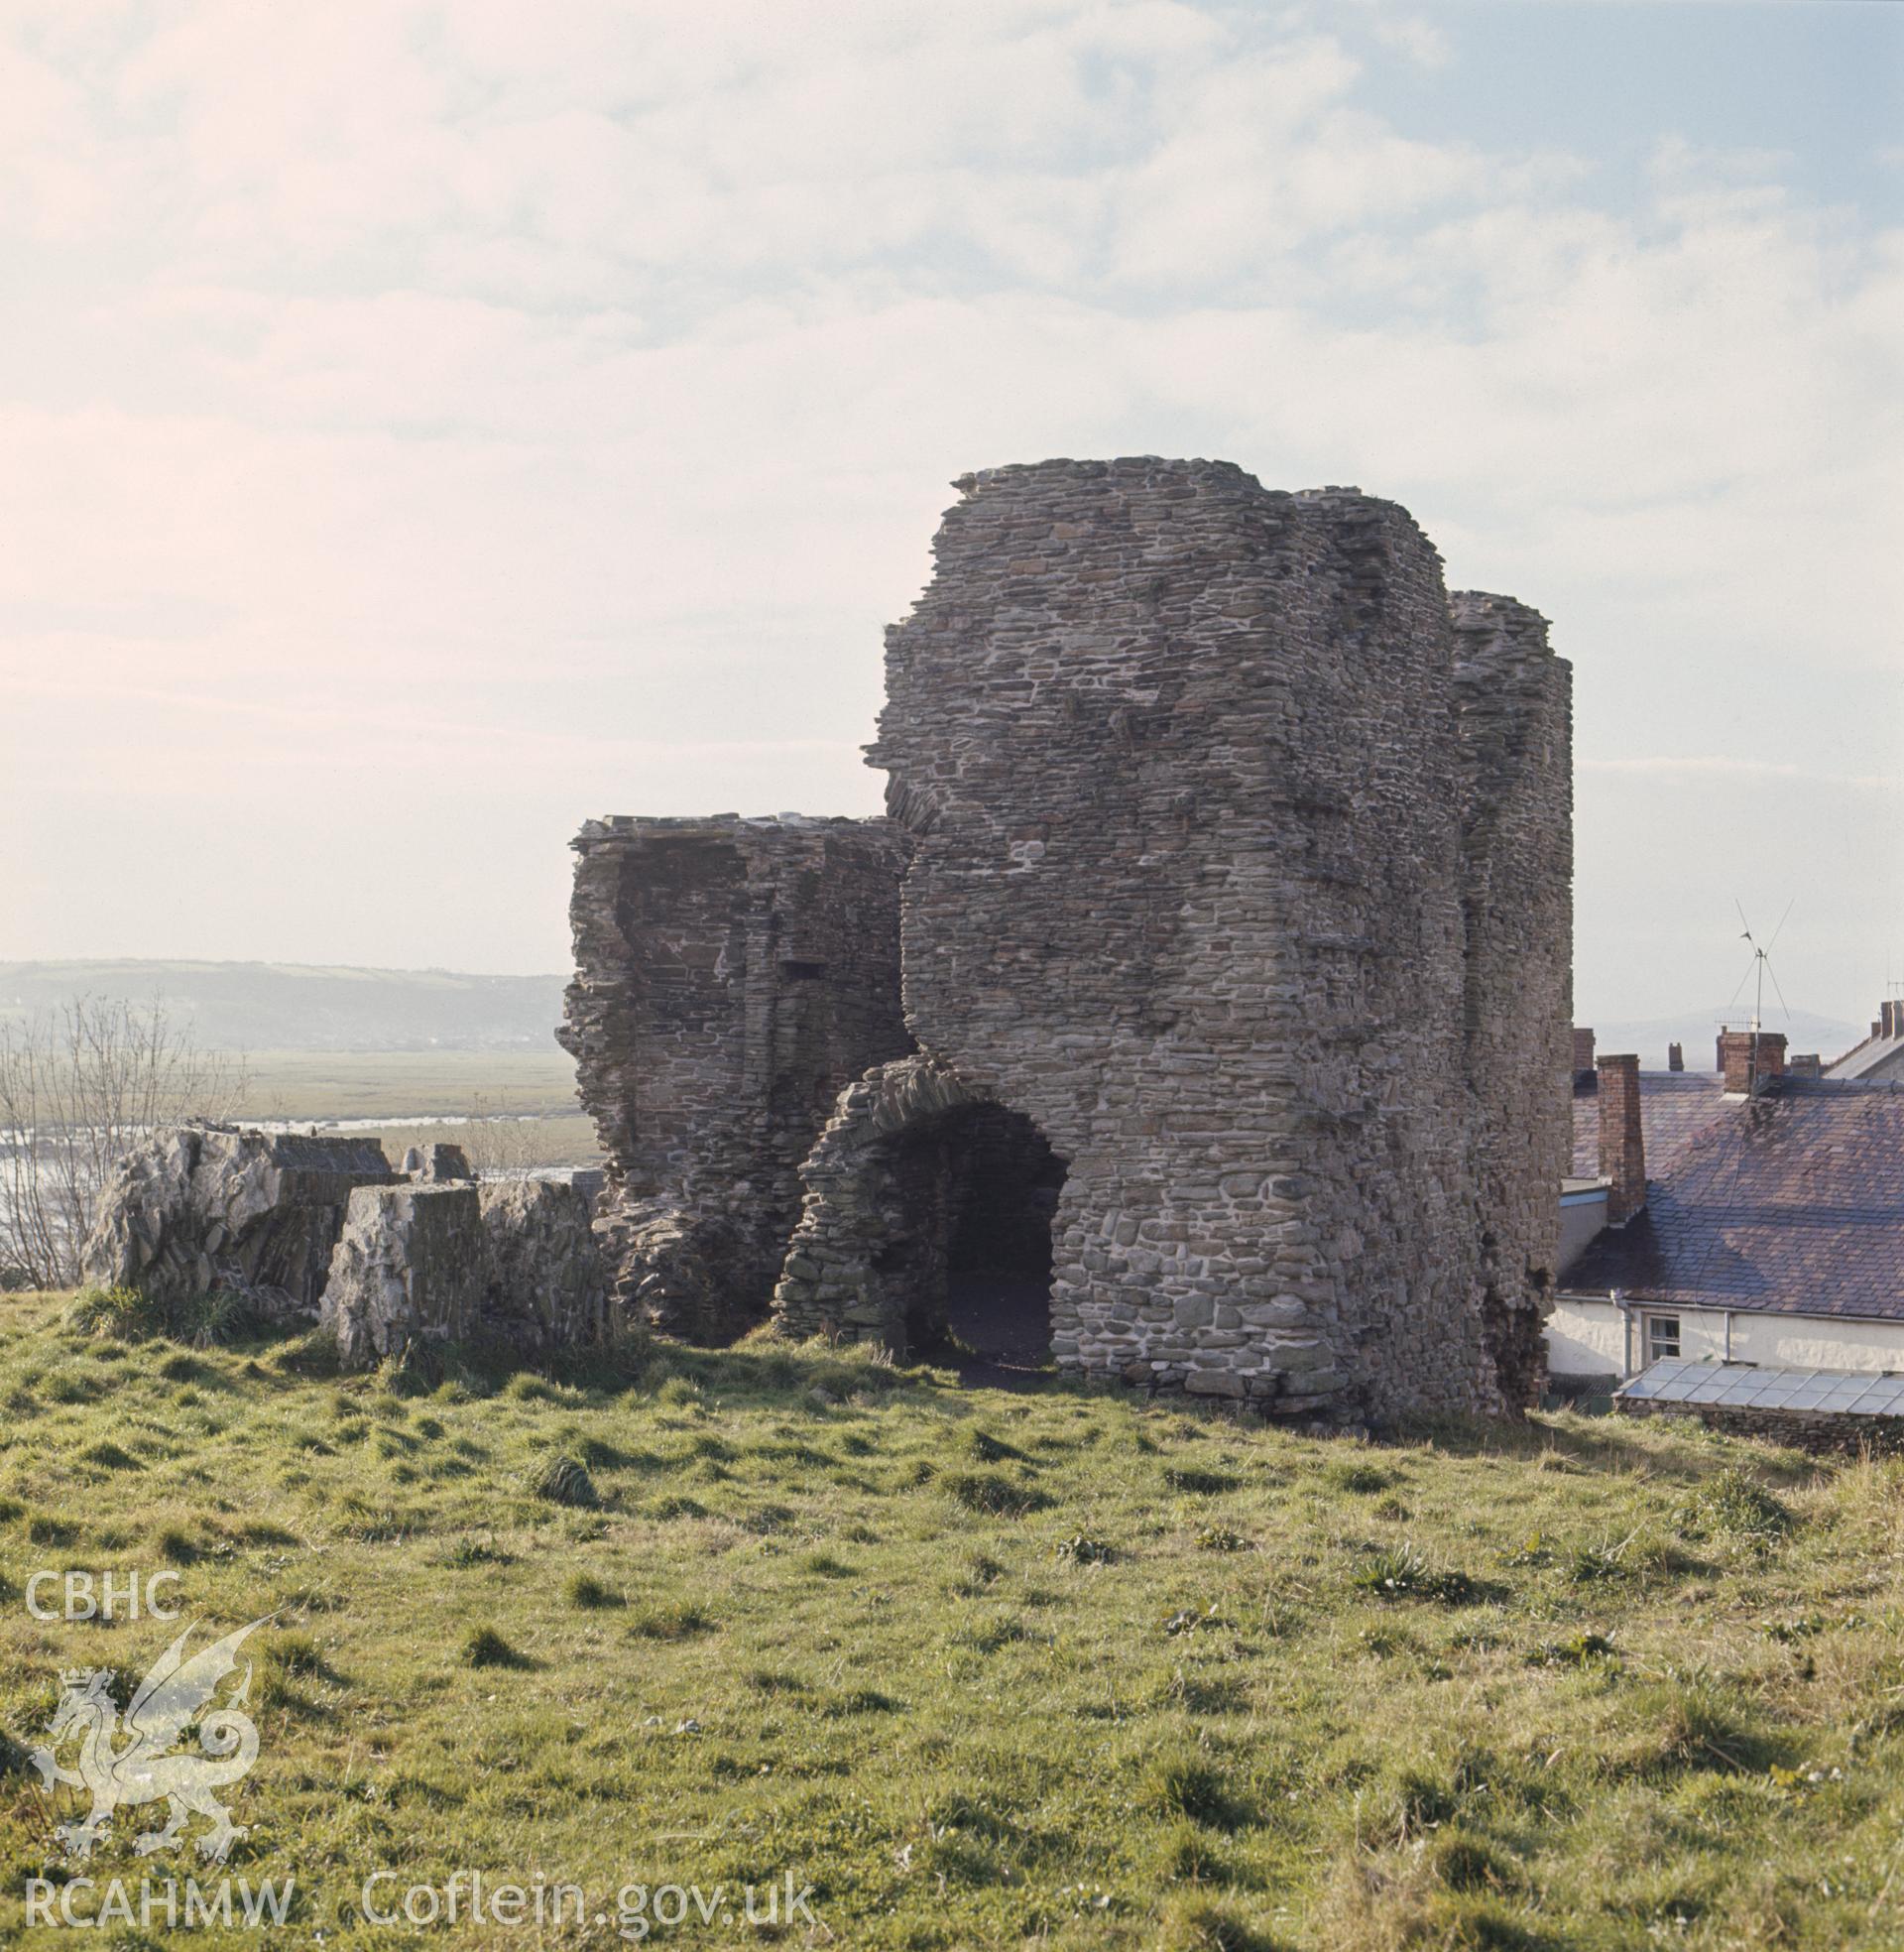 1 colour transparency showing view of Loughor Castle; collated by the former Central Office of Information.